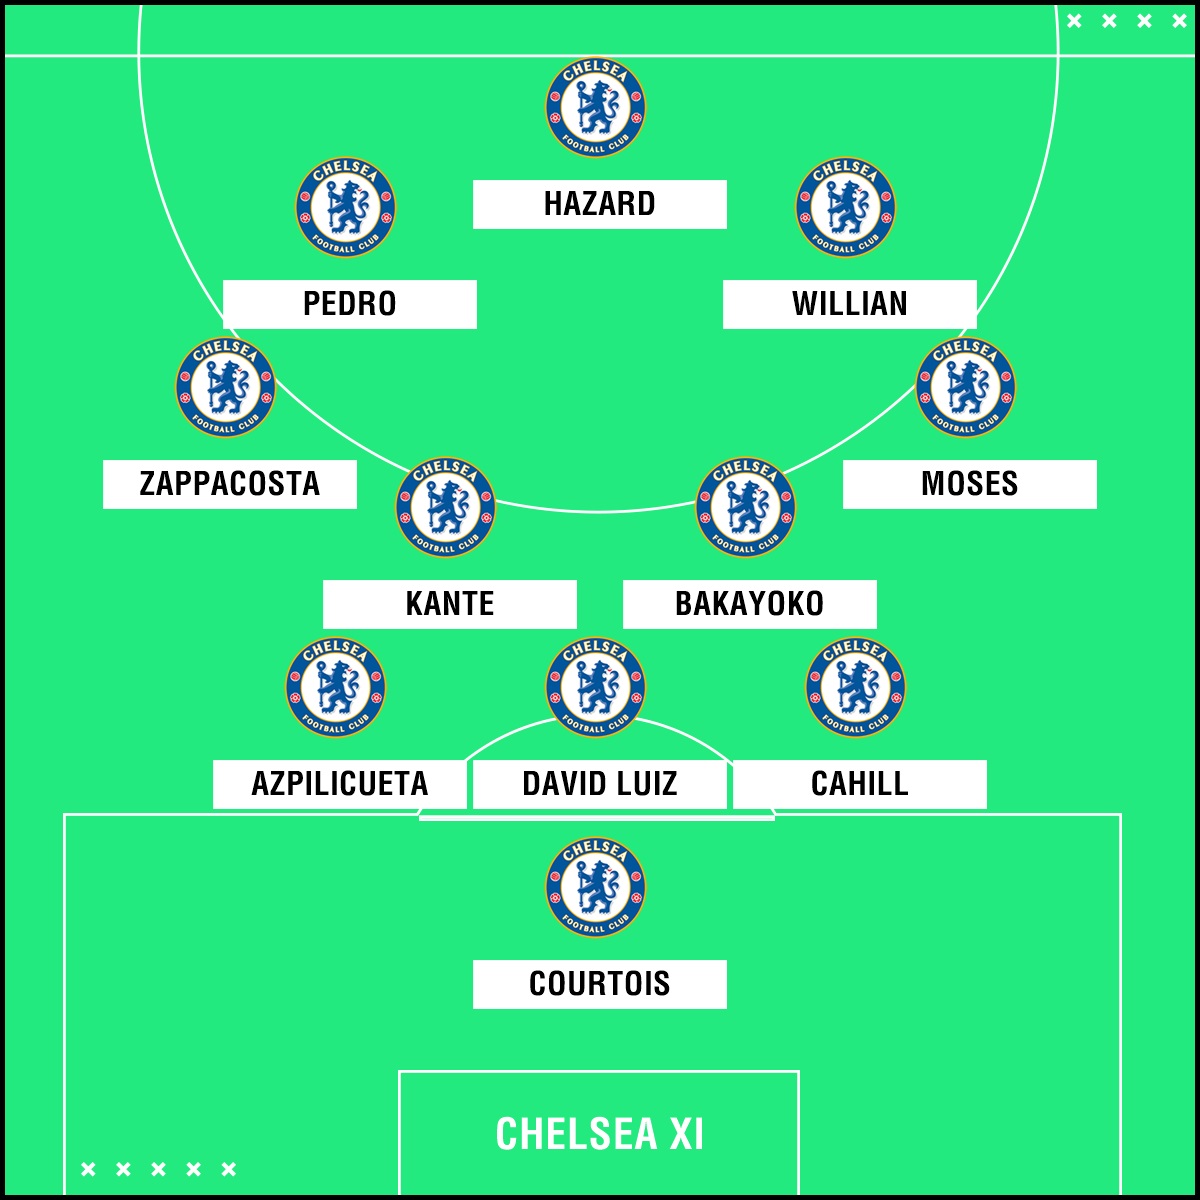 Chelsea team news Luiz returns to starting XI against Watford, with